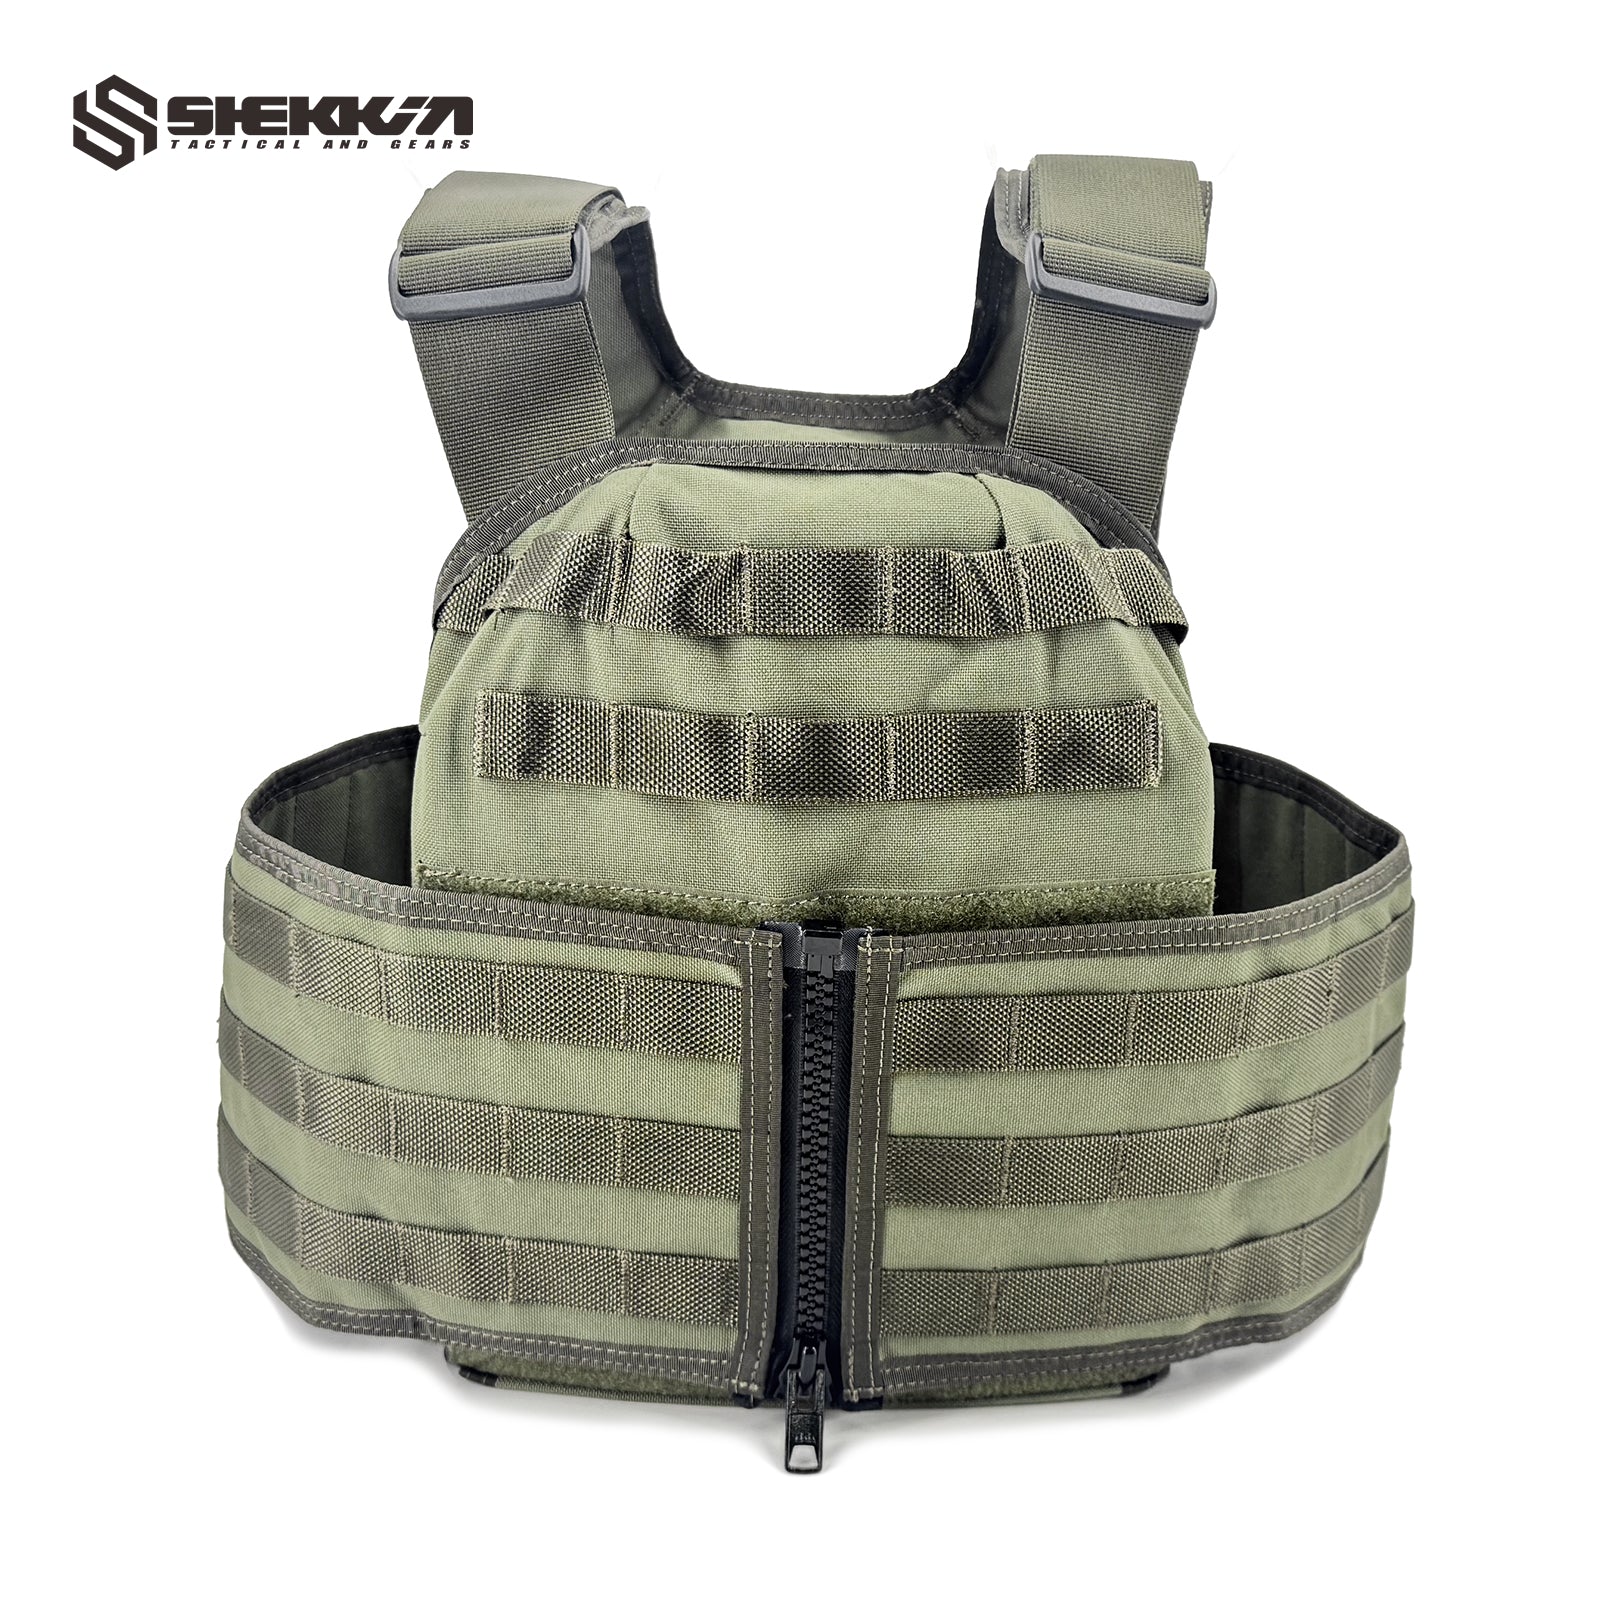 Delta force CAG tactical gear Paraclete HPC plate carrier smoke green